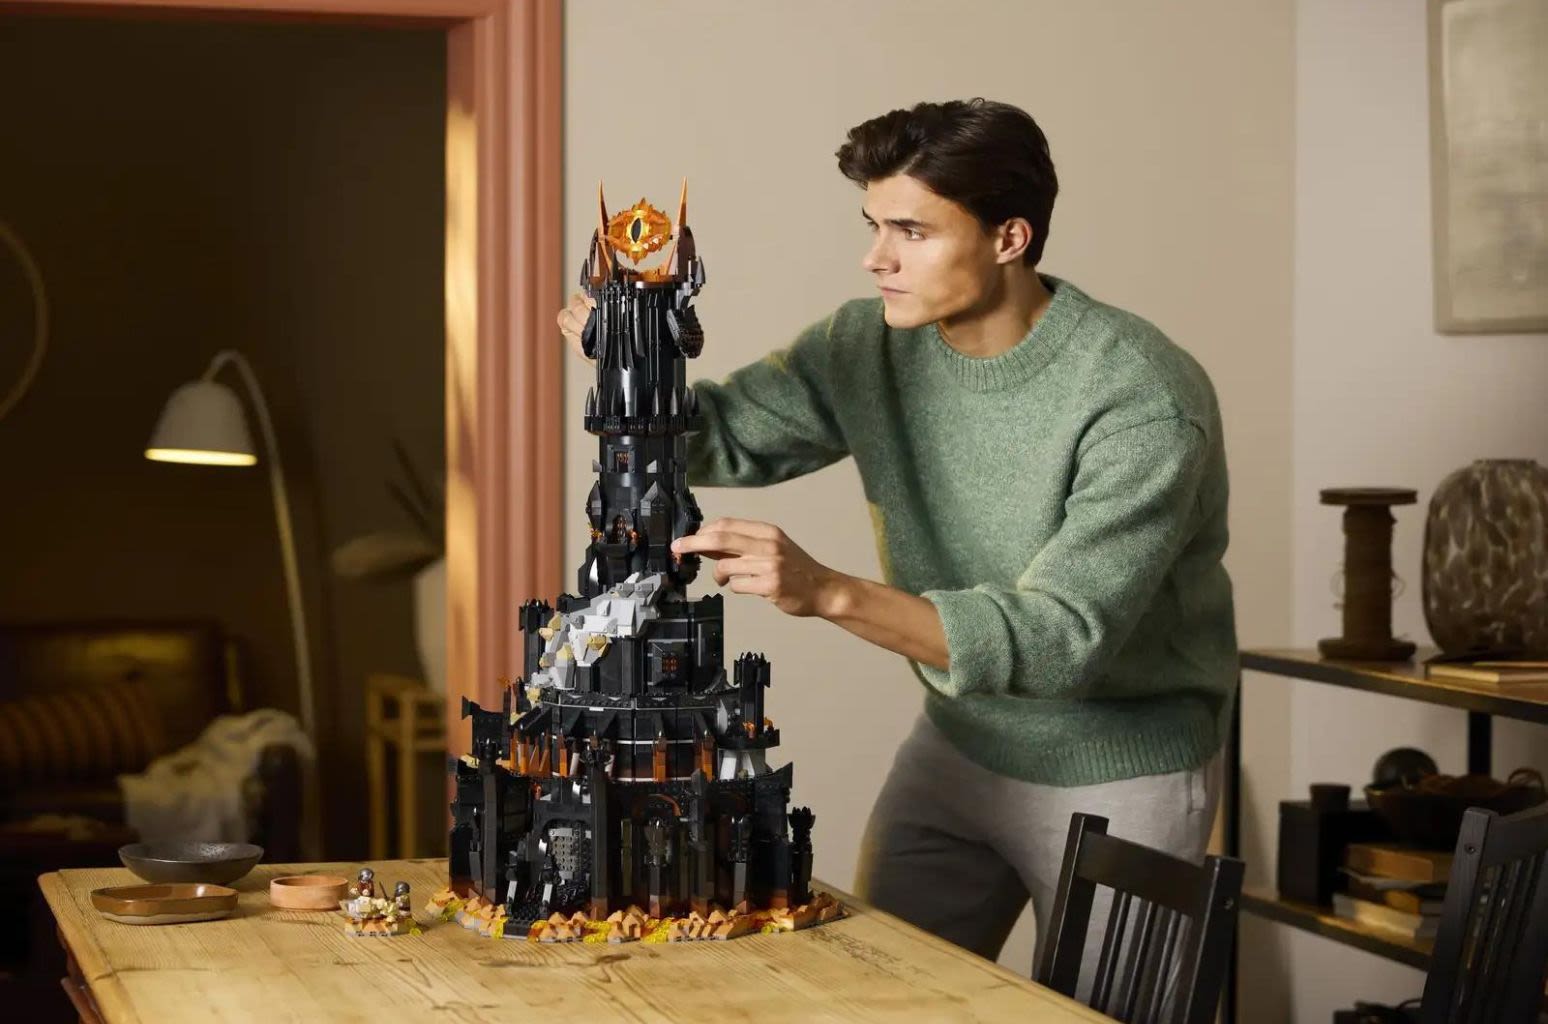 Lego Drops New ‘Lord of the Rings’ Barad-dûr Set: Here’s Where to Get One Online